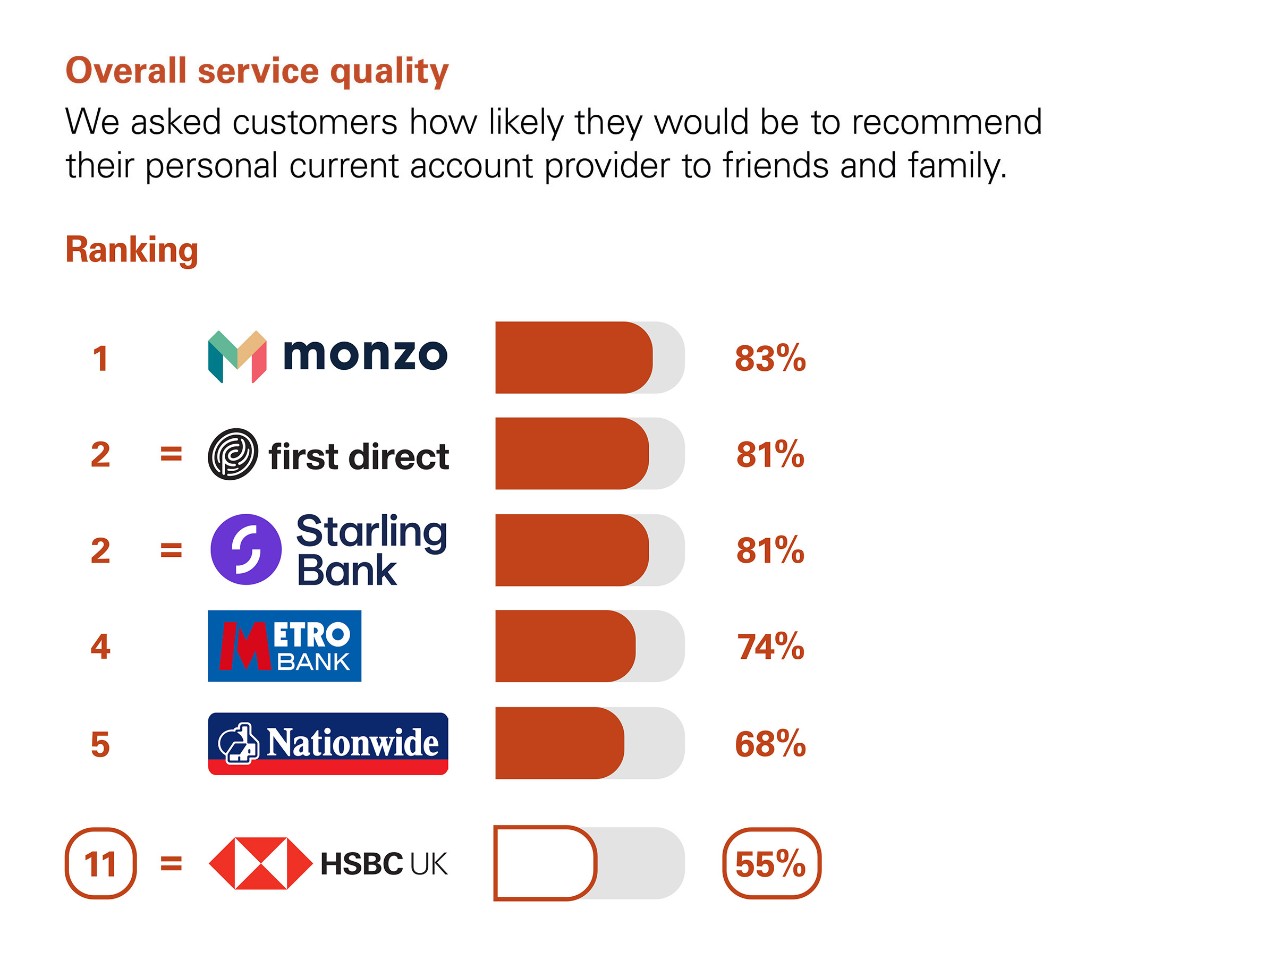 Overall Service Quality. We asked customers how likely they would be to recommend their personal current account  provider to friends and family. Ranking:  1 Monzo 83%. equal 2 first direct  81%. equal 2 Starling bank 81%. 4 Metro bank 74%. 5 Nationwide 68%. equal 11  HSBC UK 55%.